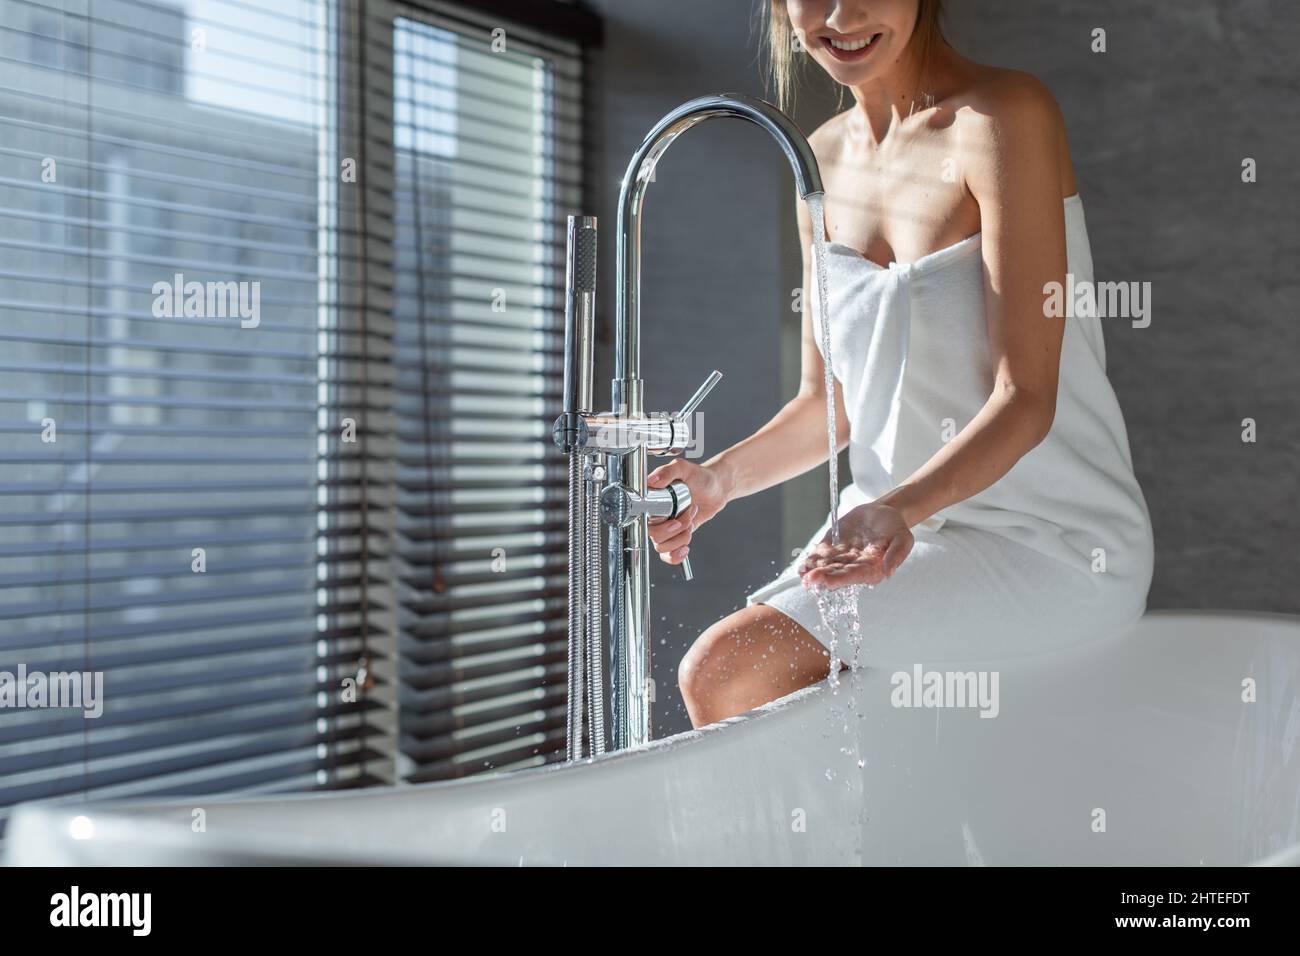 Beautiful Young Female Wrapped In Towel Preparing To Take Bath Stock Photo